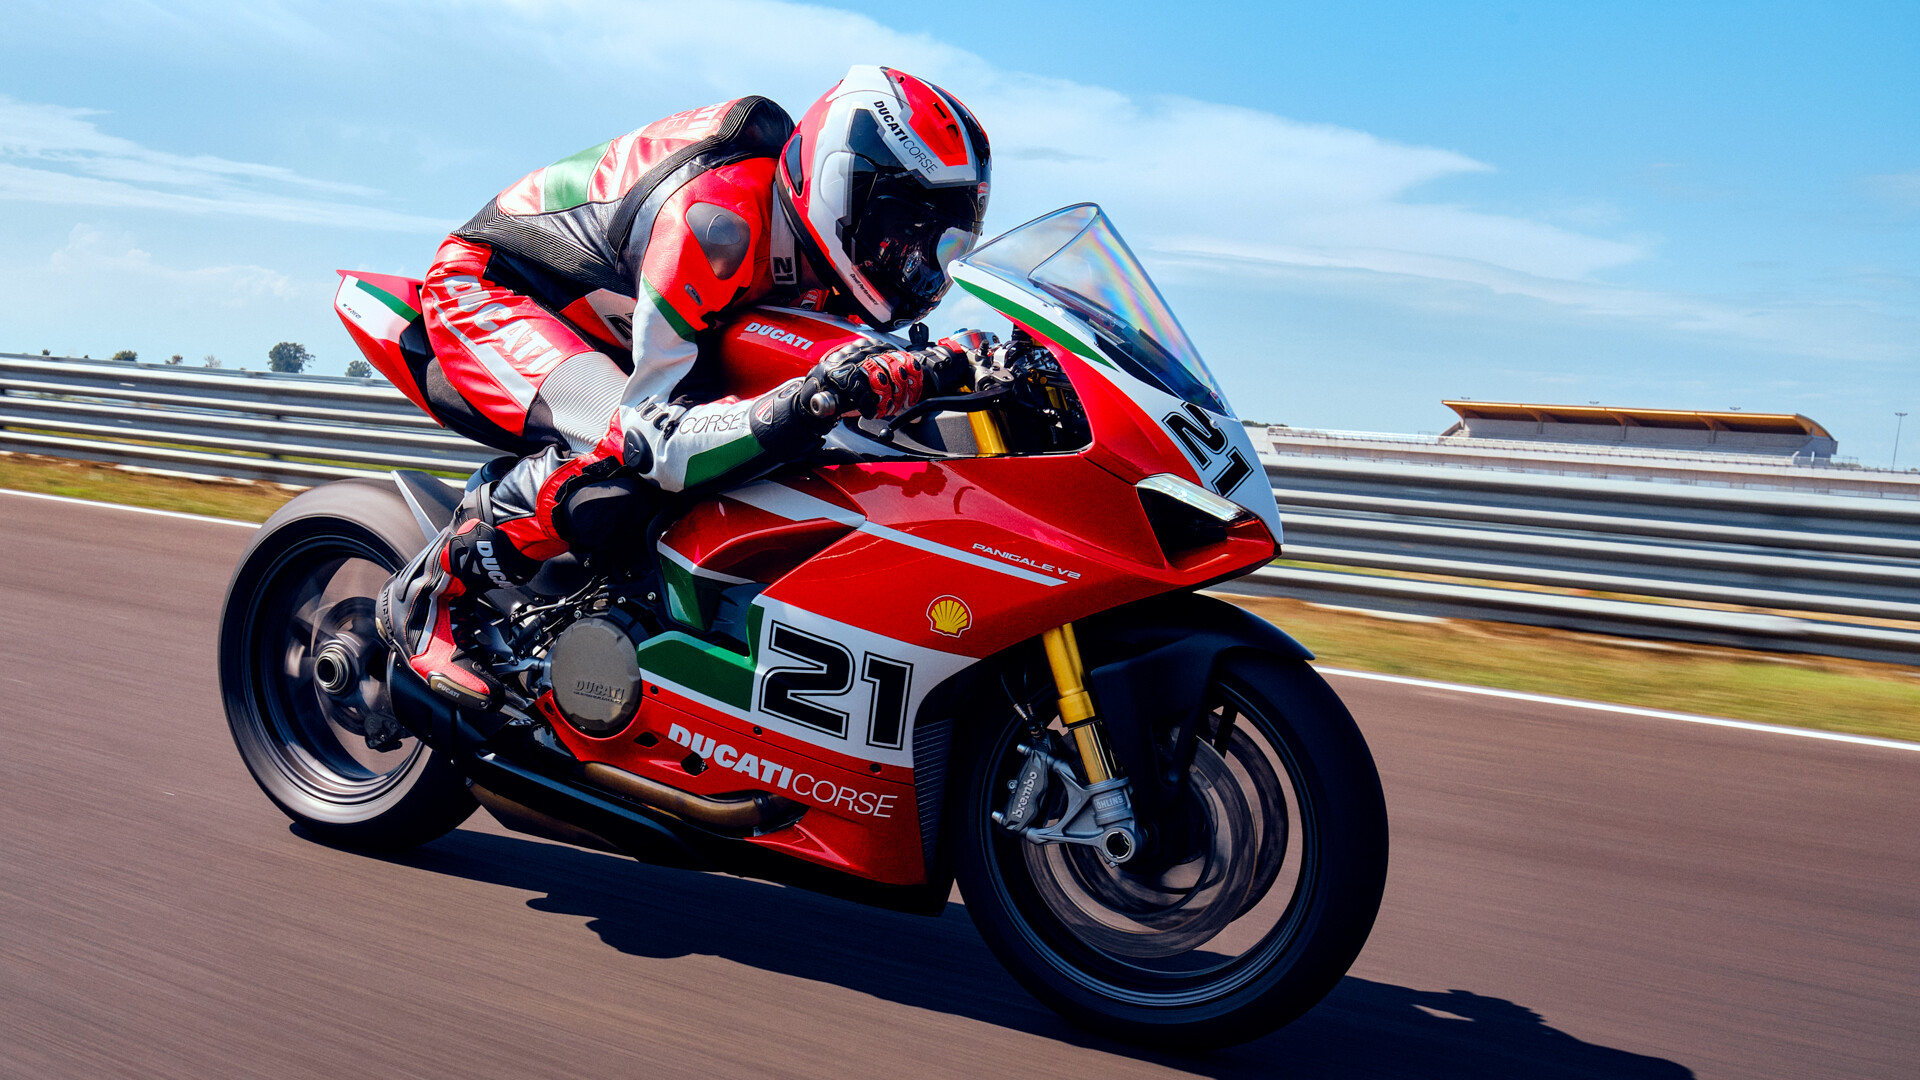 Ducati Panigale V2: Troy Bayliss, The V-twin superbike, Ducati's lineup. 1920x1080 Full HD Wallpaper.